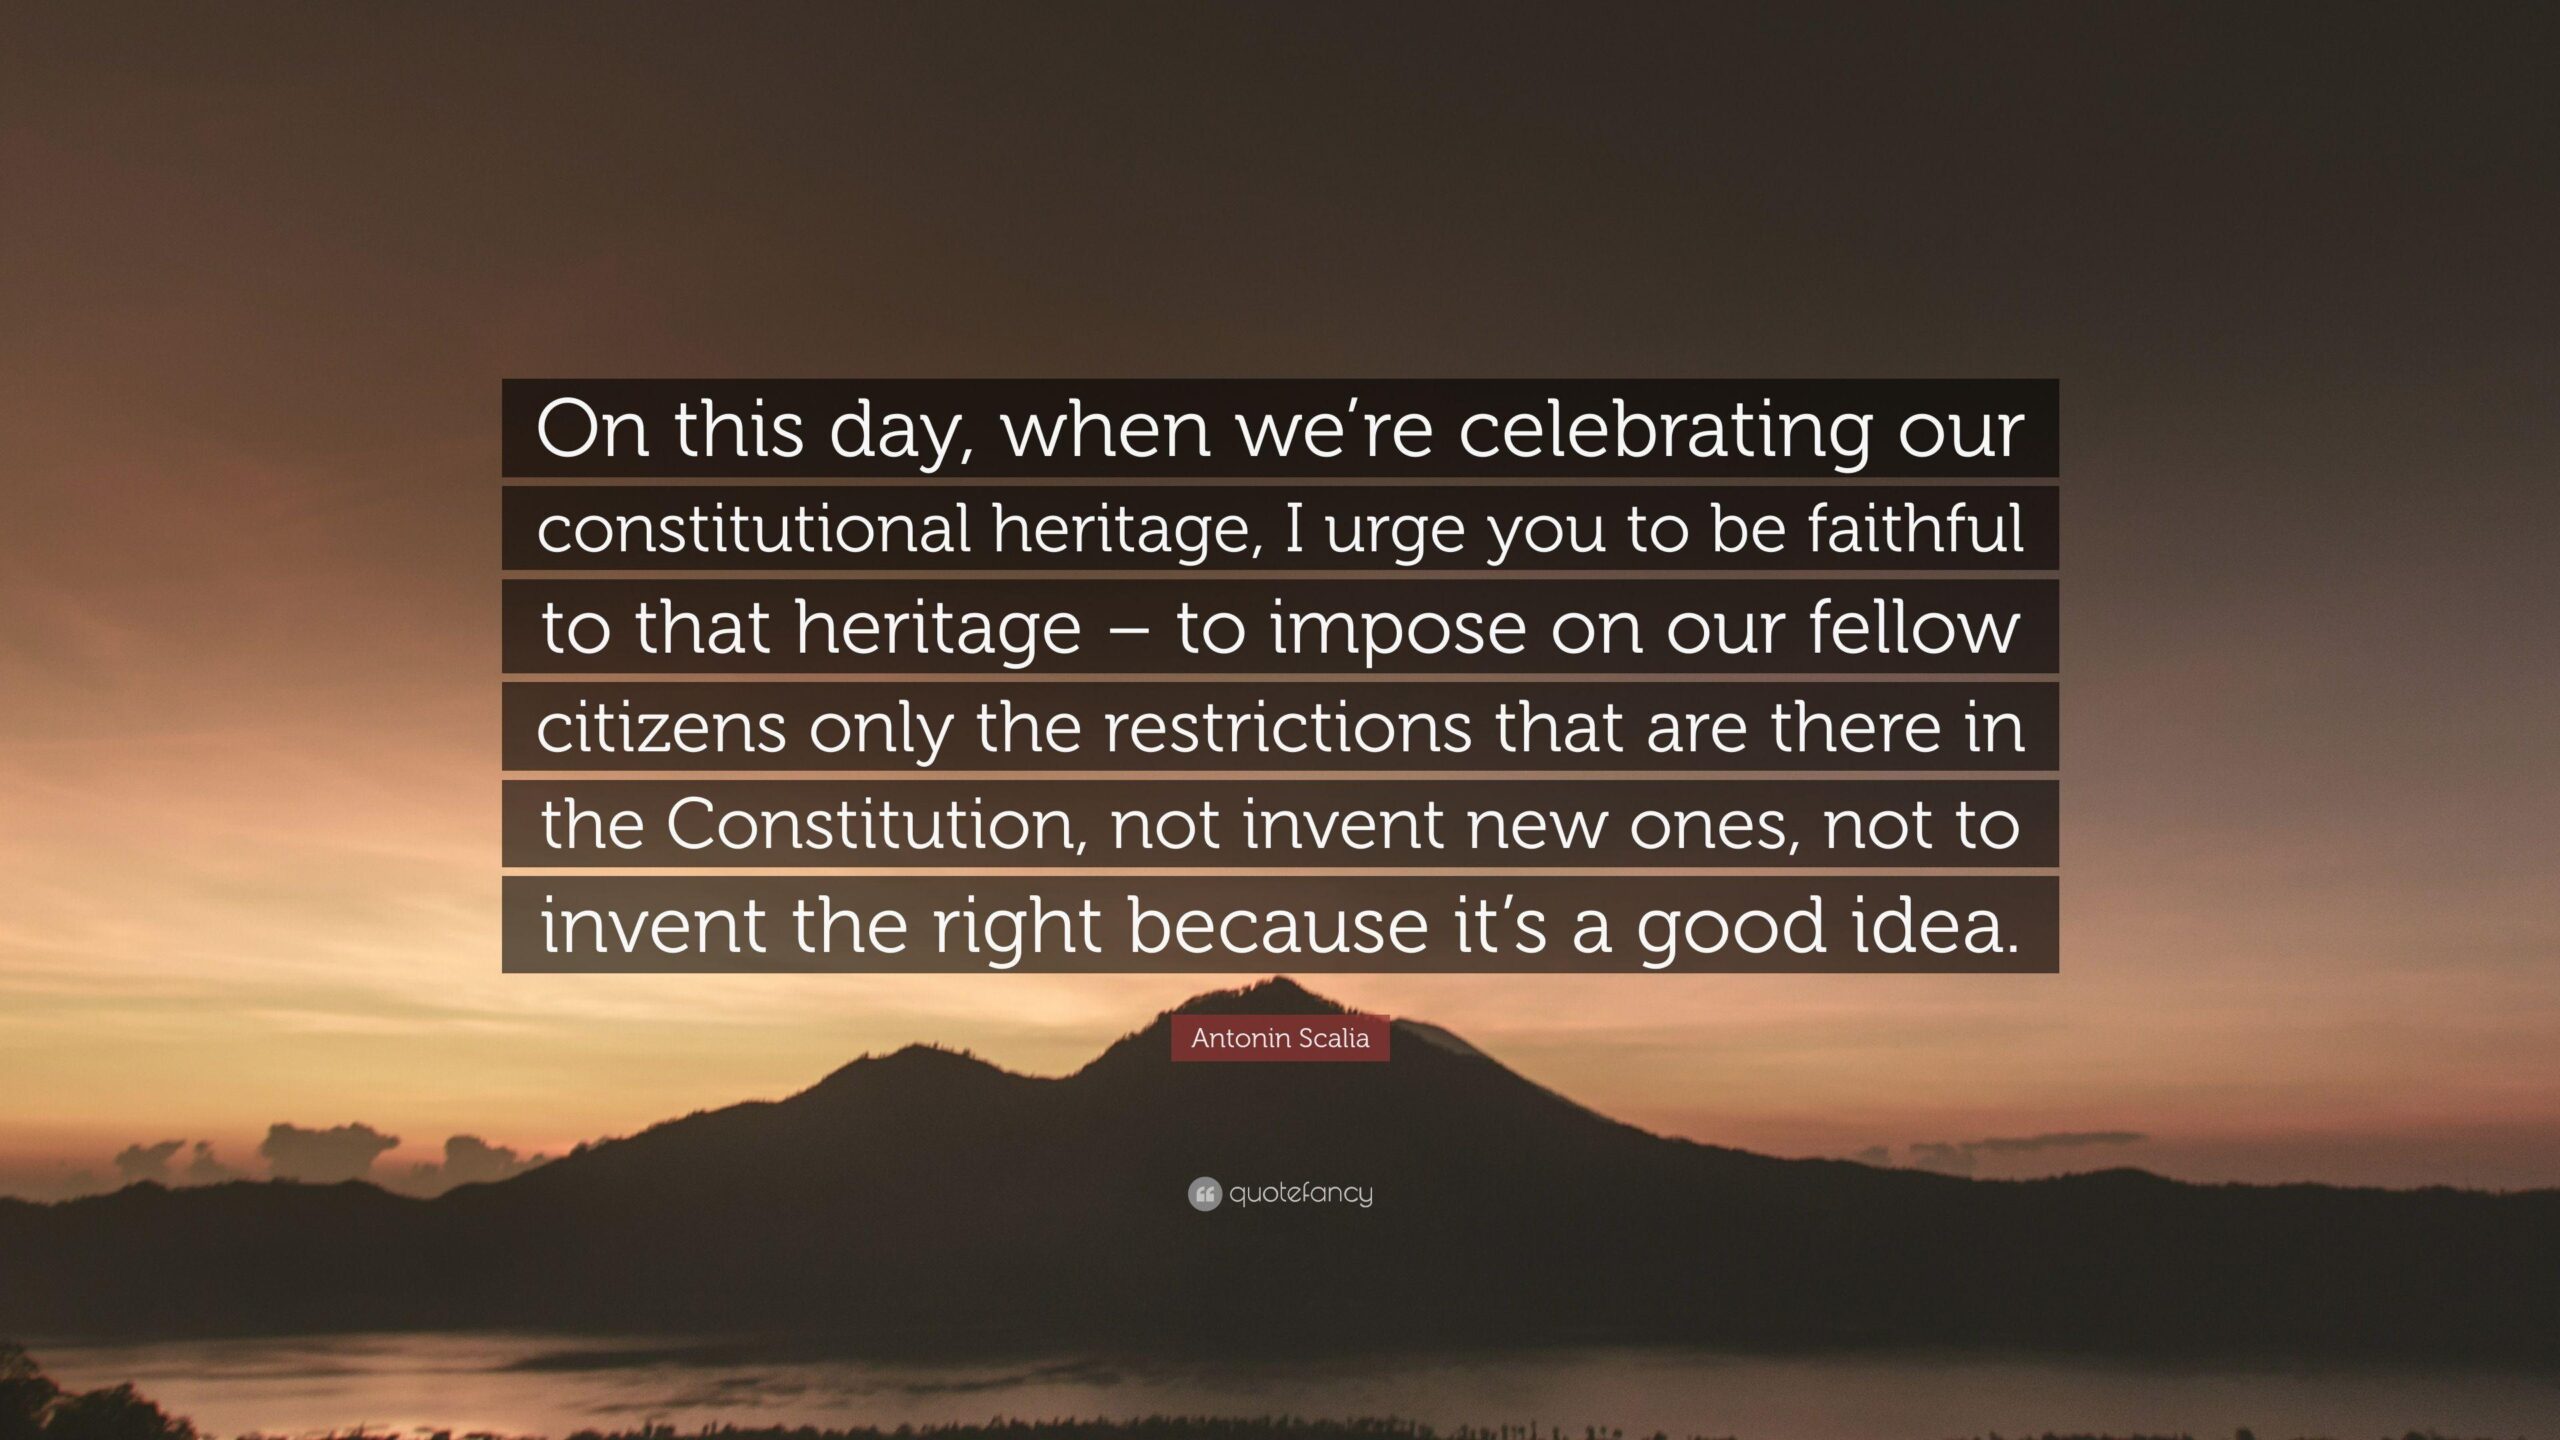 Antonin Scalia Quote “On this day, when we’re celebrating our